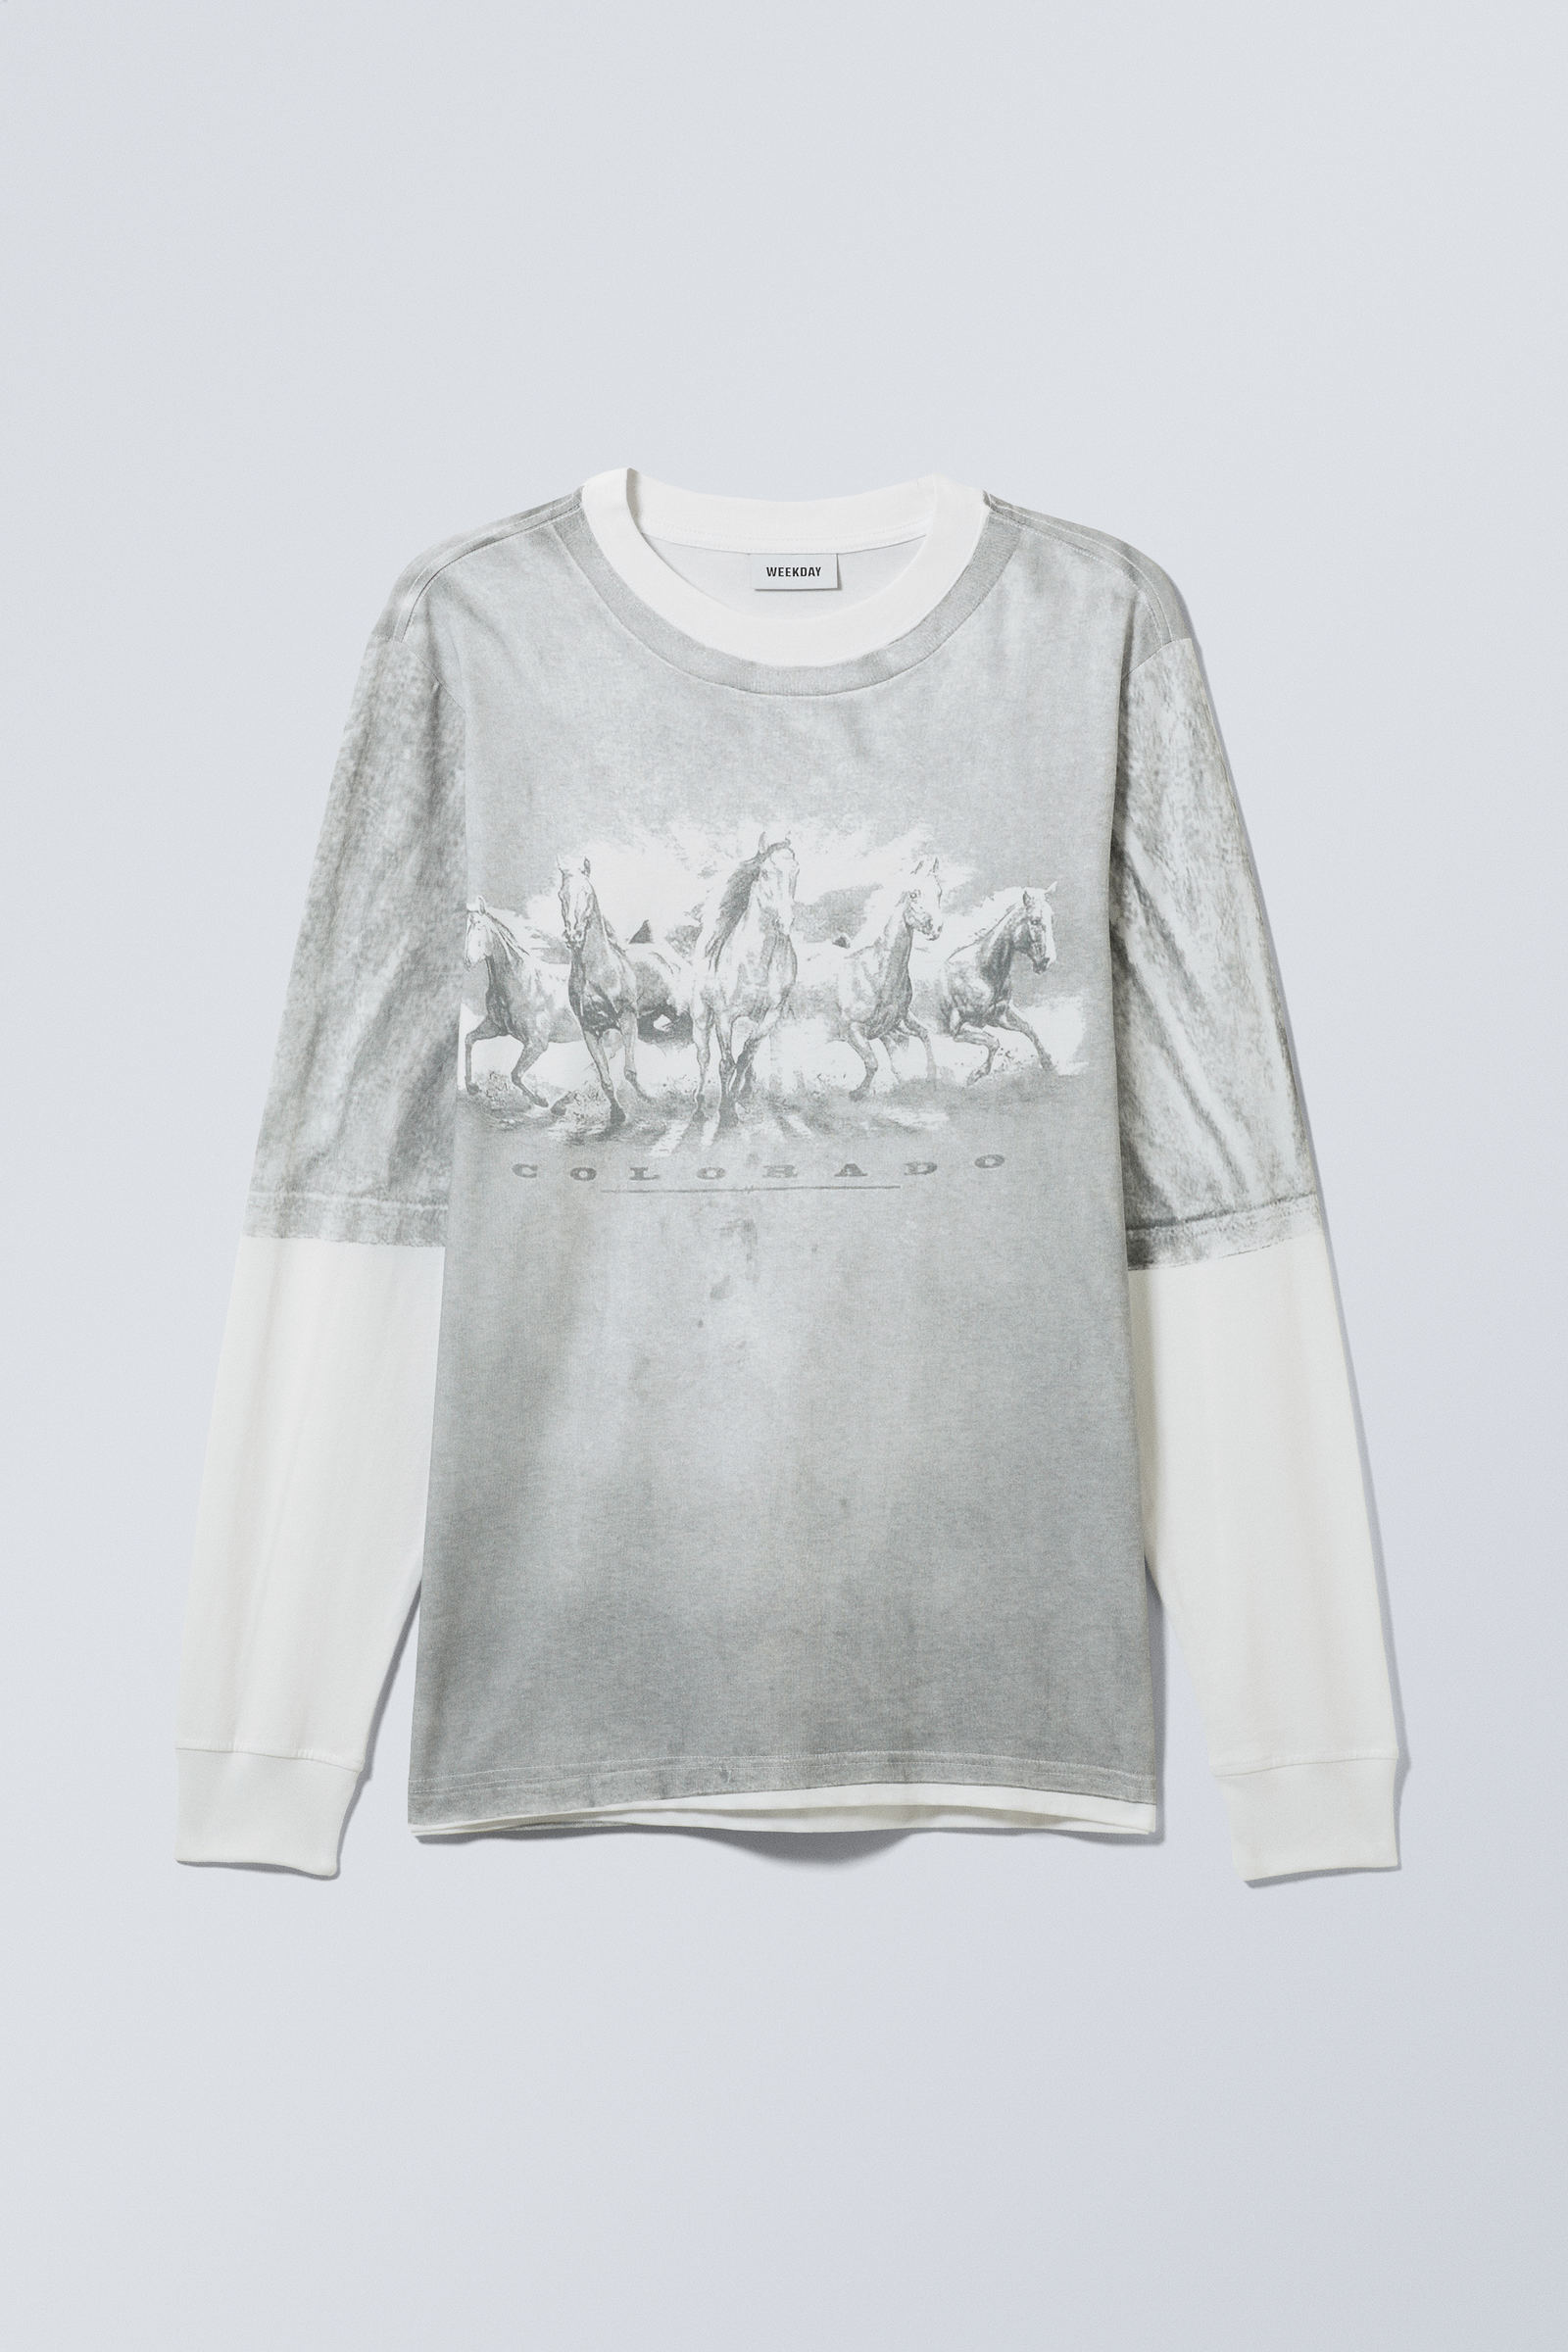 Trompe L'oeil Colorado Horses - Relaxed Graphic Long Sleeve Top - 1